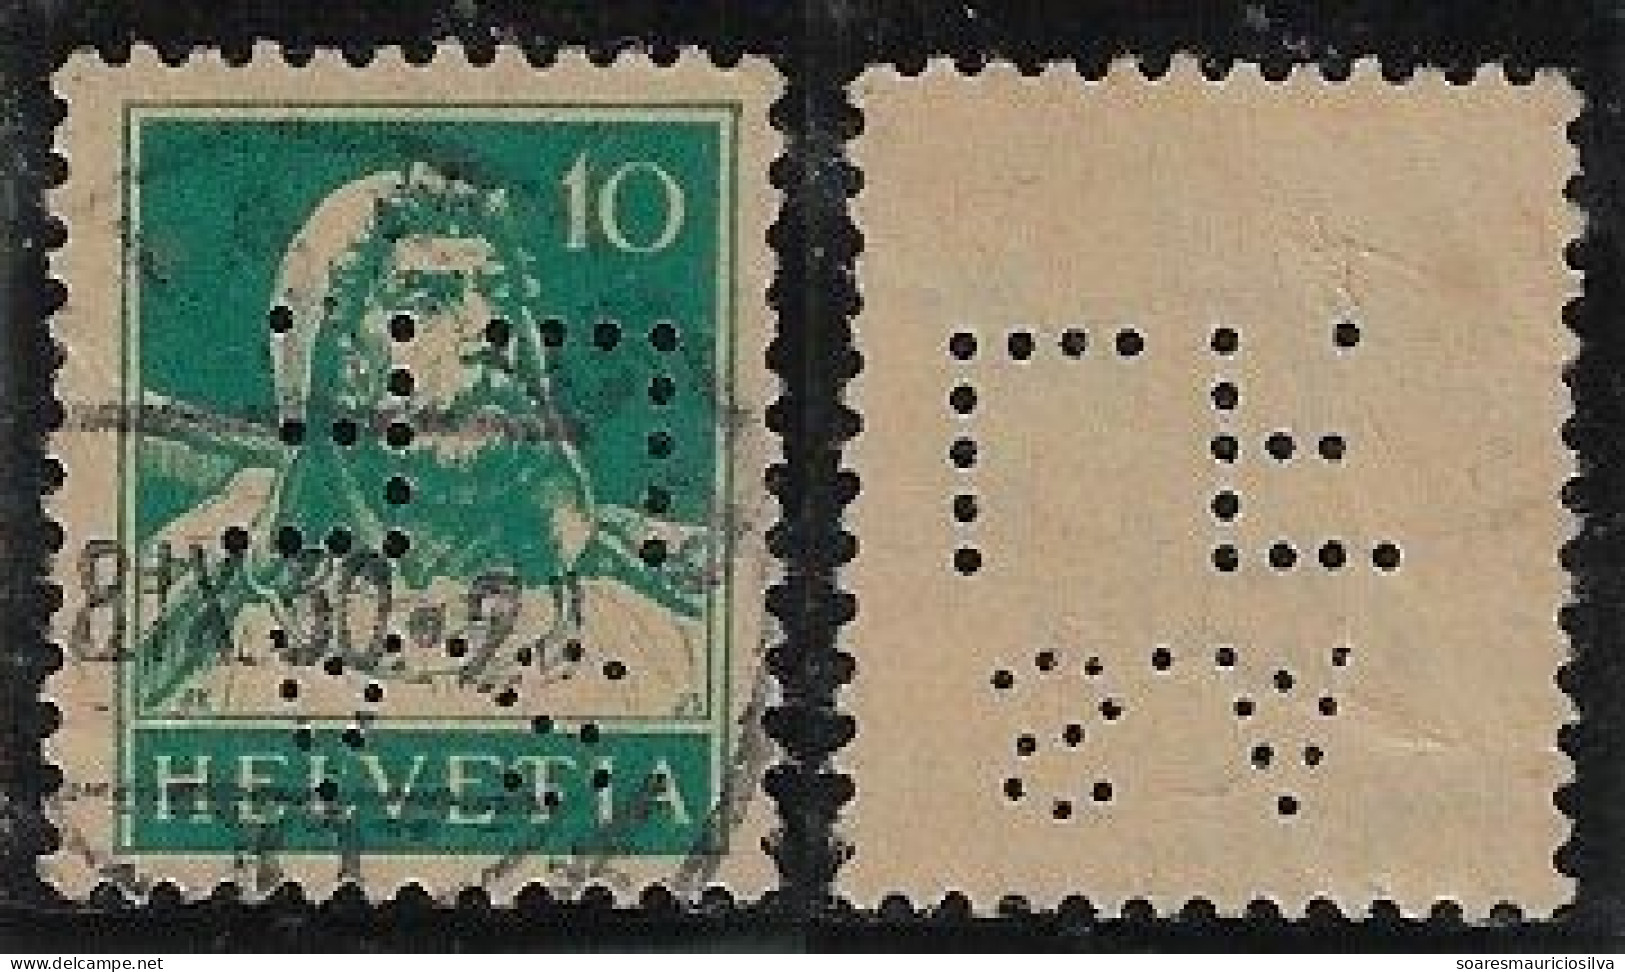 Switzerland 1925/1934 Stamp With Perfin S.A/LF. By SA Svizzera Luciano Franzosini Transport In Chiasso Lochung Perfore - Perfins